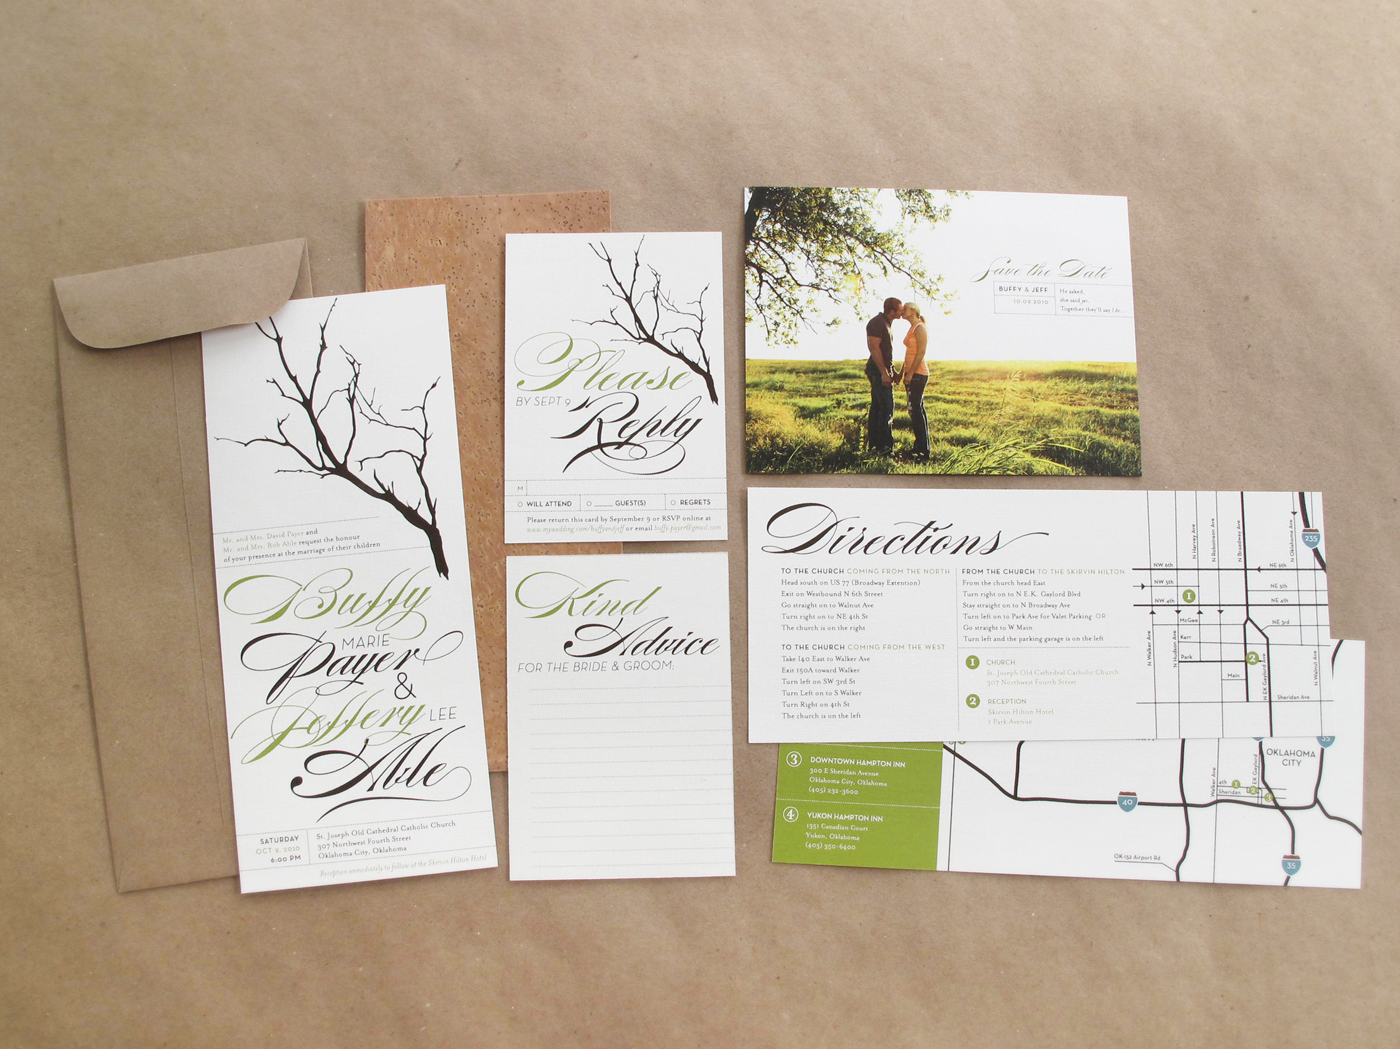 Where to print your wedding invitations